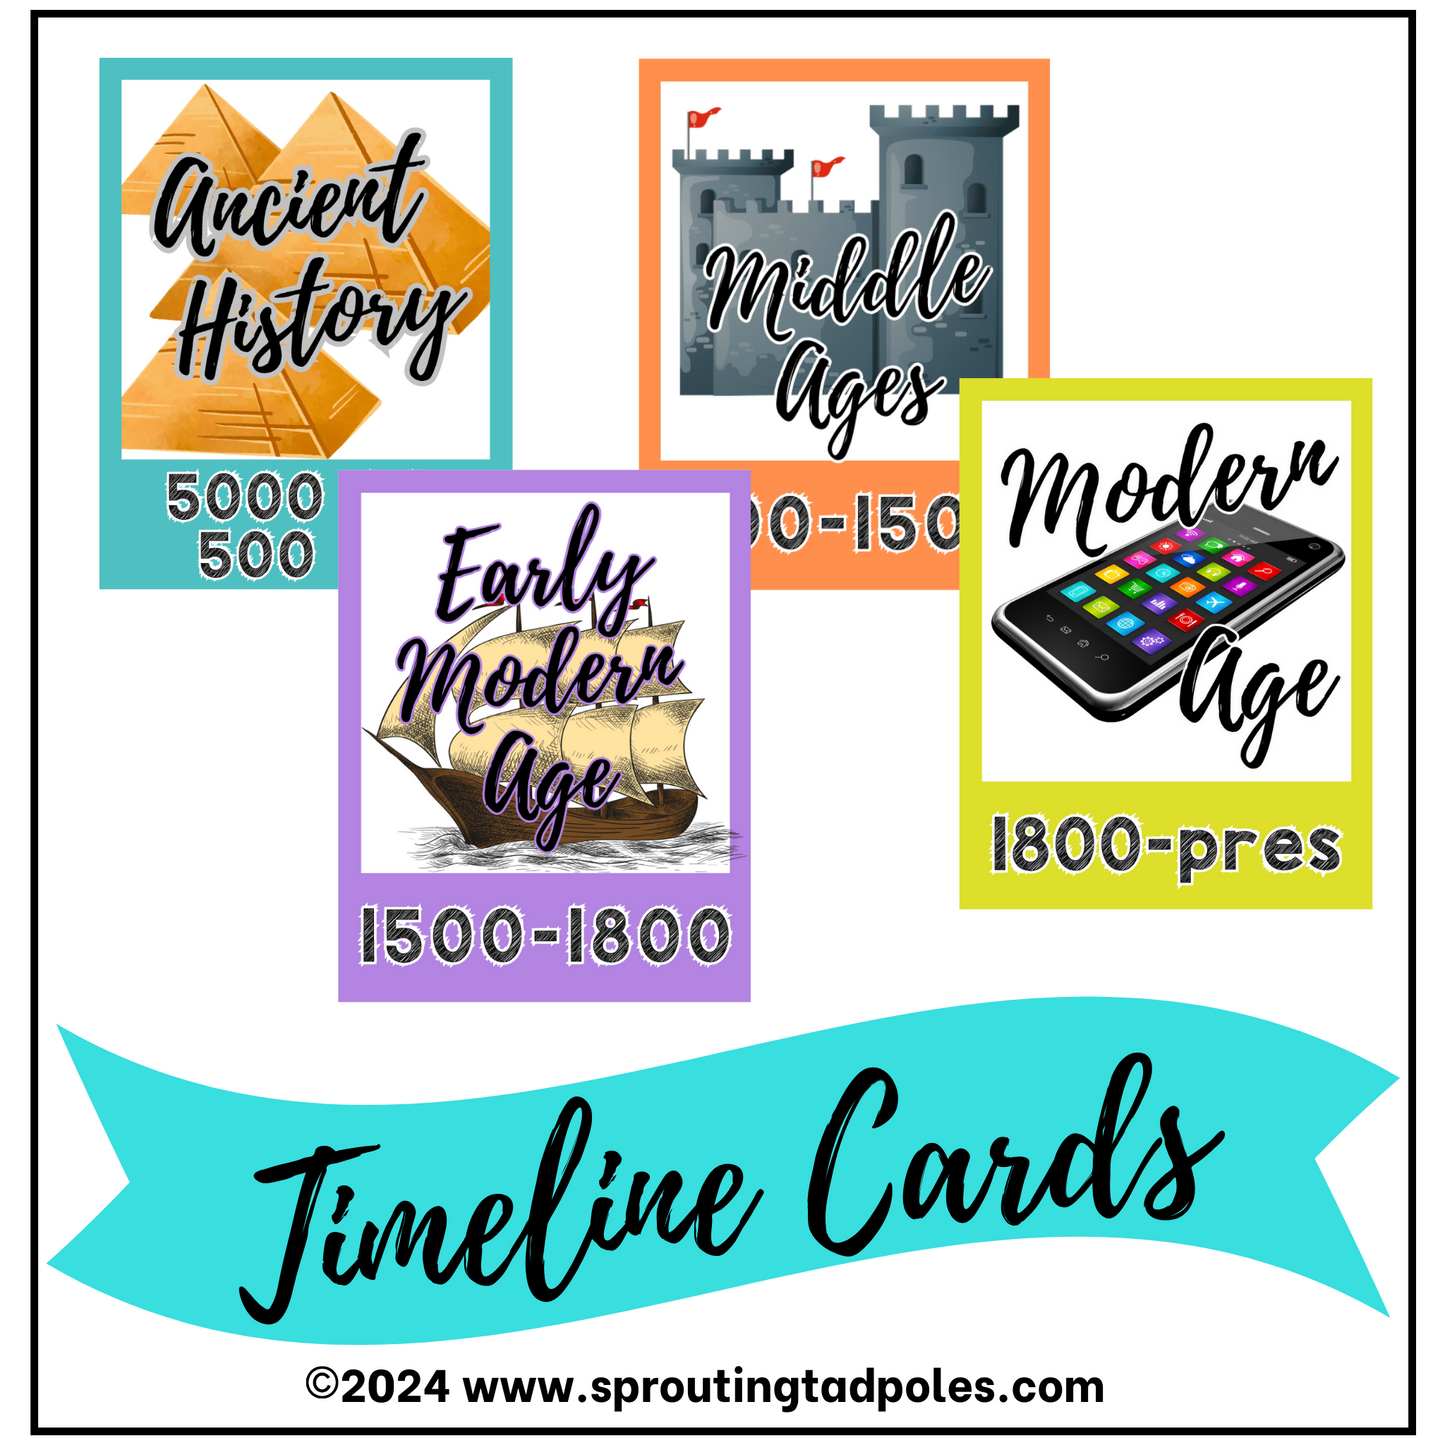 History Timeline Cards Series - PHYSICAL & DIGITAL VERSION